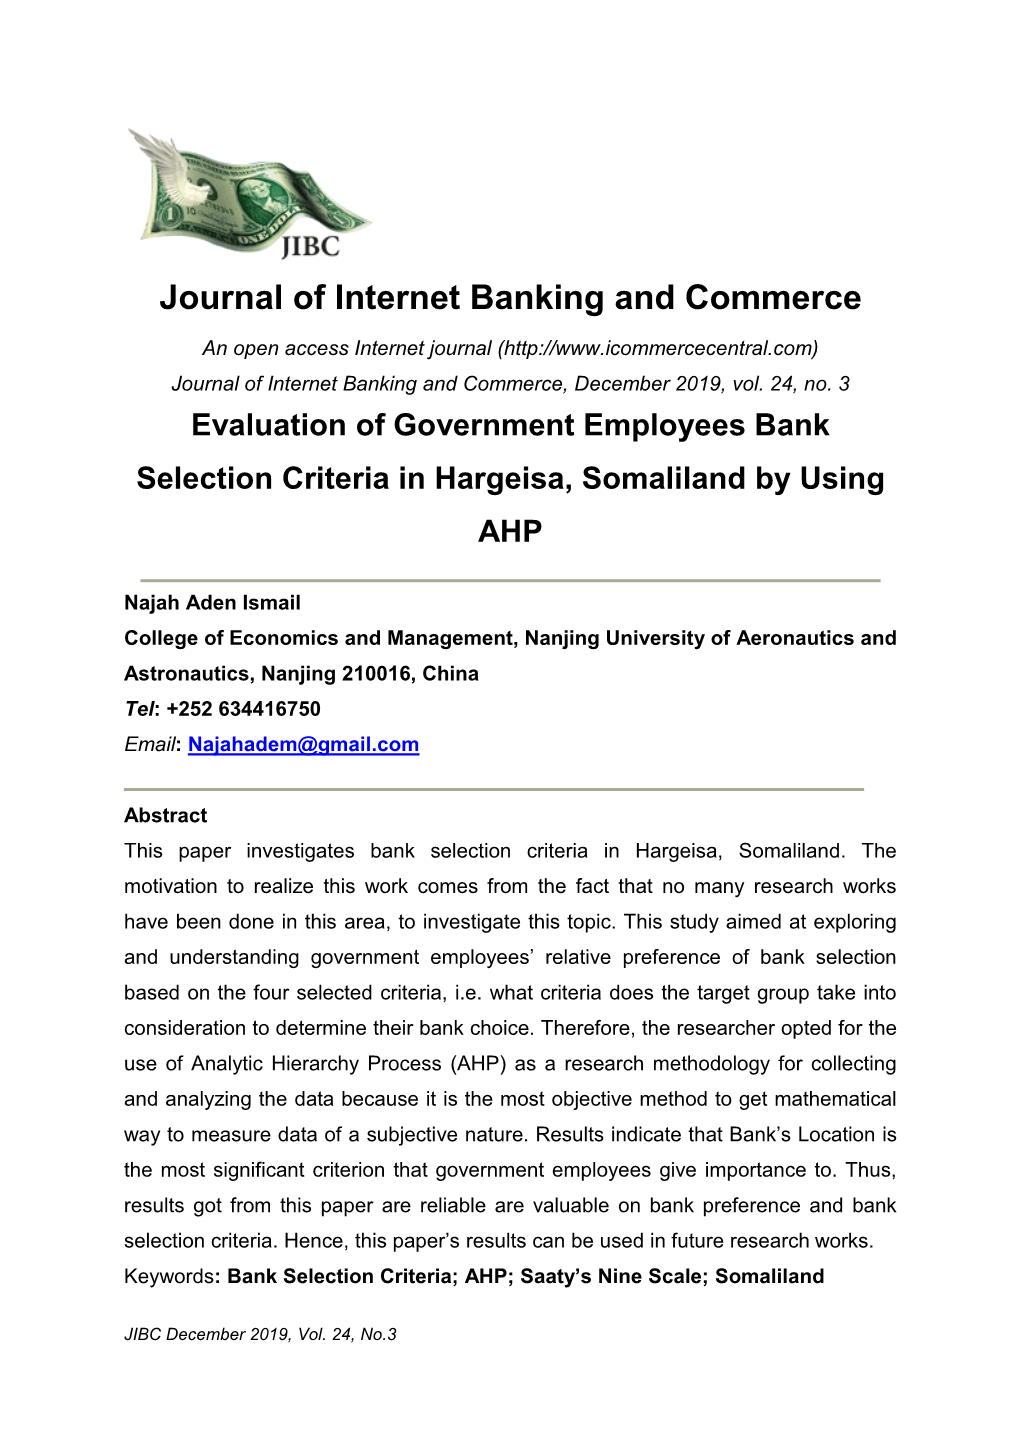 Evaluation of Government Employees Bank Selection Criteria in Hargeisa, Somaliland by Using AHP